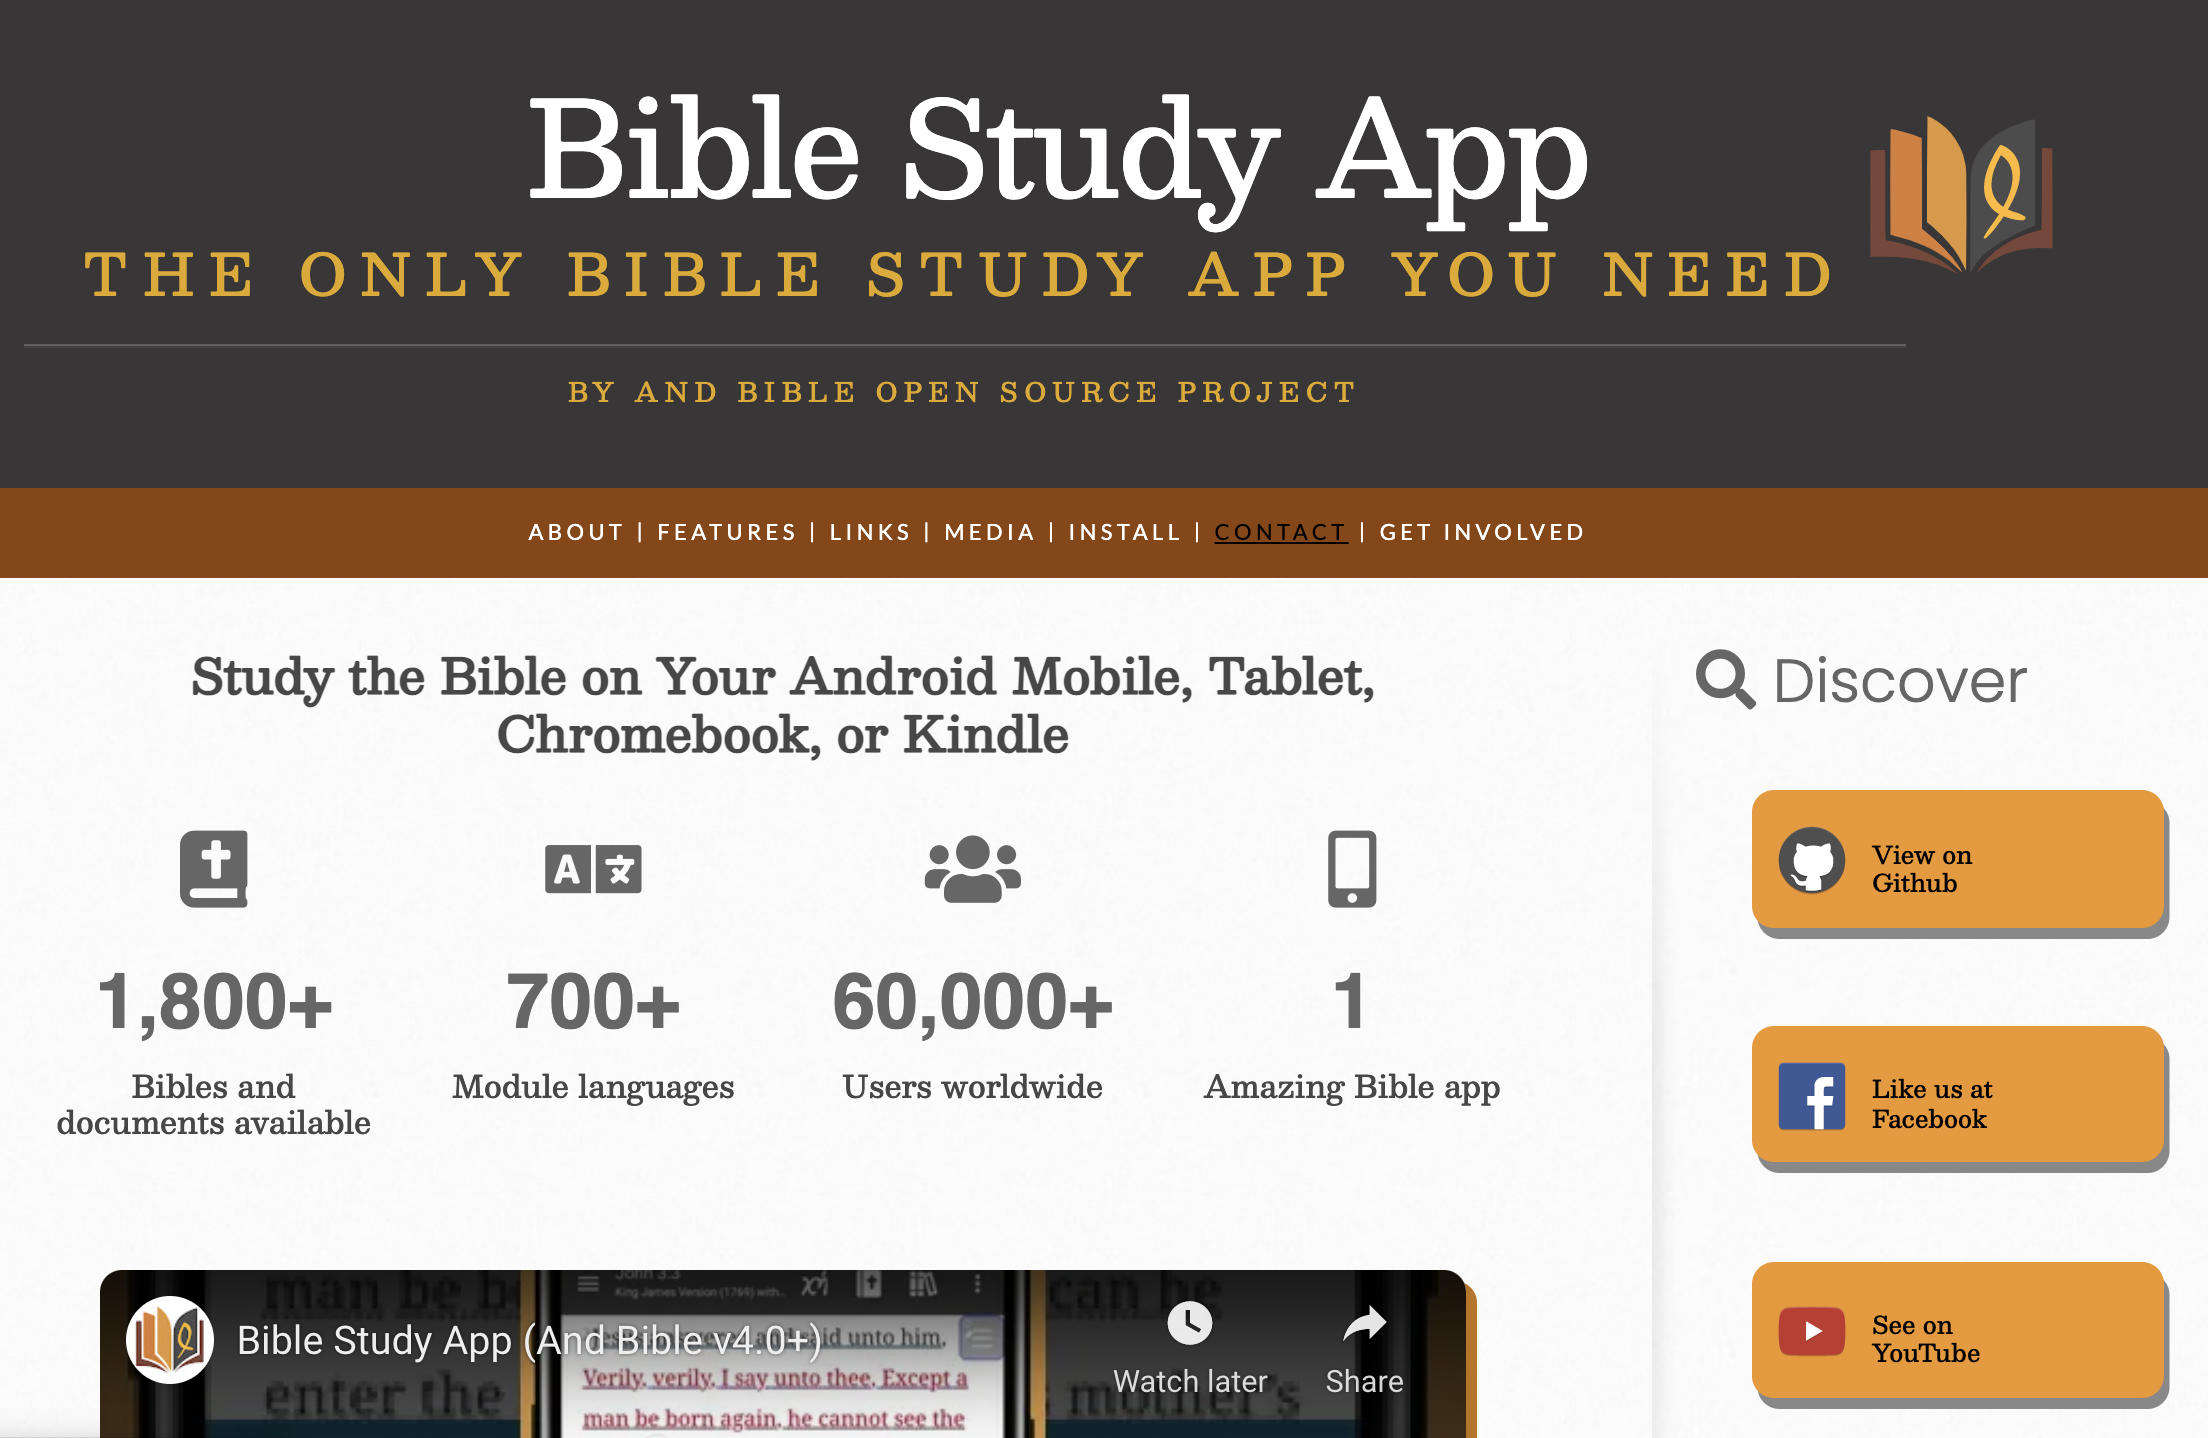 ScriptureReader - A free and open-source software that lets you read and meditate on bible verses without any disruptive popups.
Bible Verse Viewer - An alternative program designed to display bible verses in a popup-free manner, ensuring a seamless reading experience.